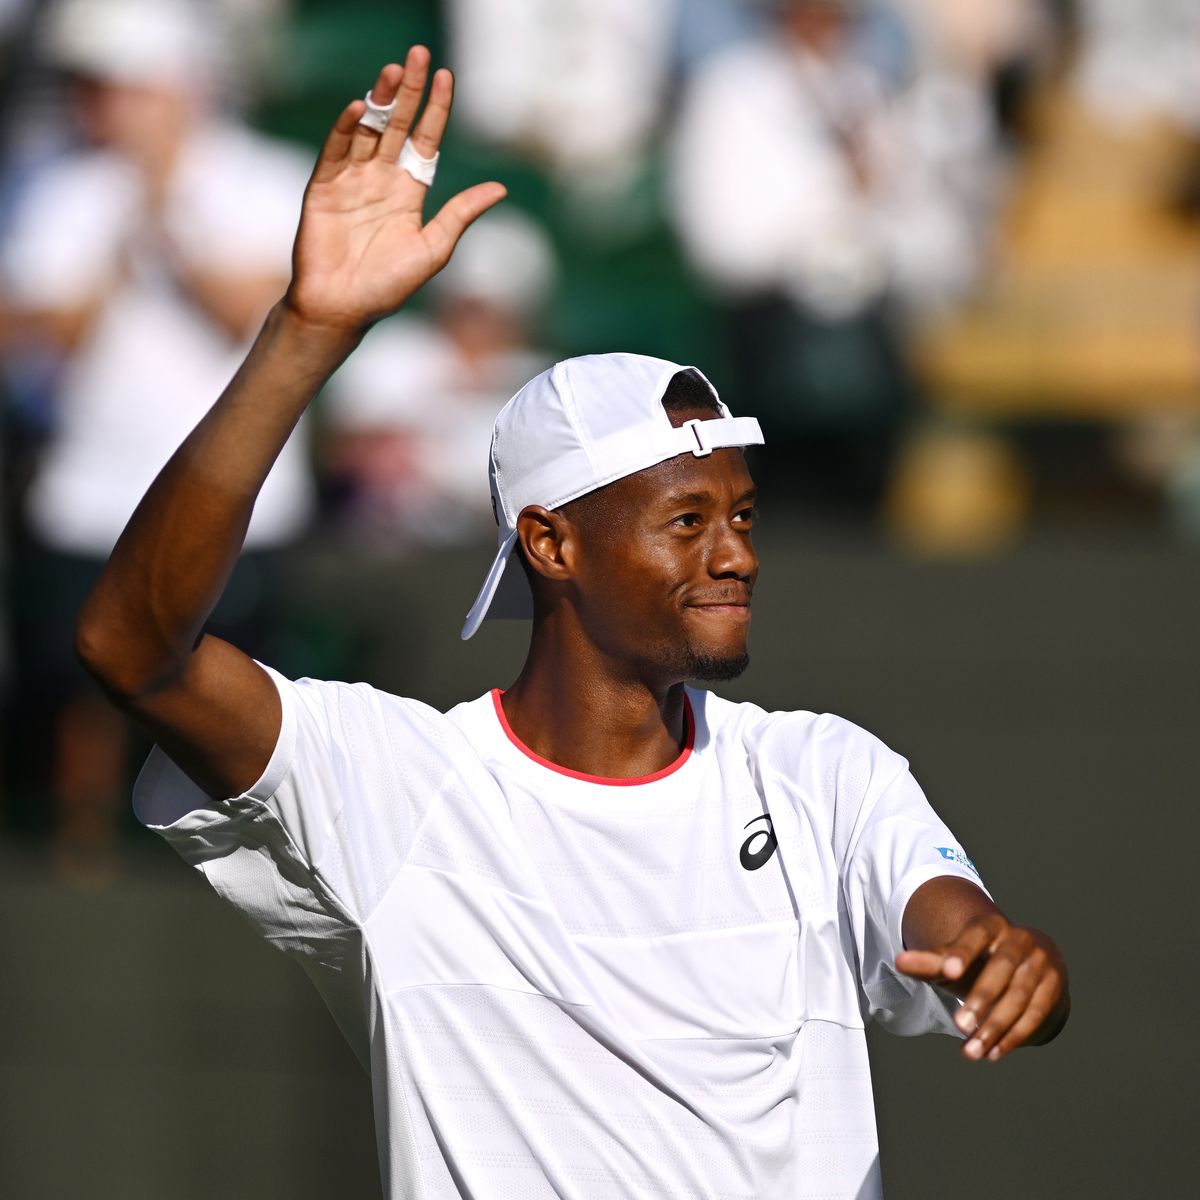 Who Is Christopher Eubanks, the American Tennis Player Having a